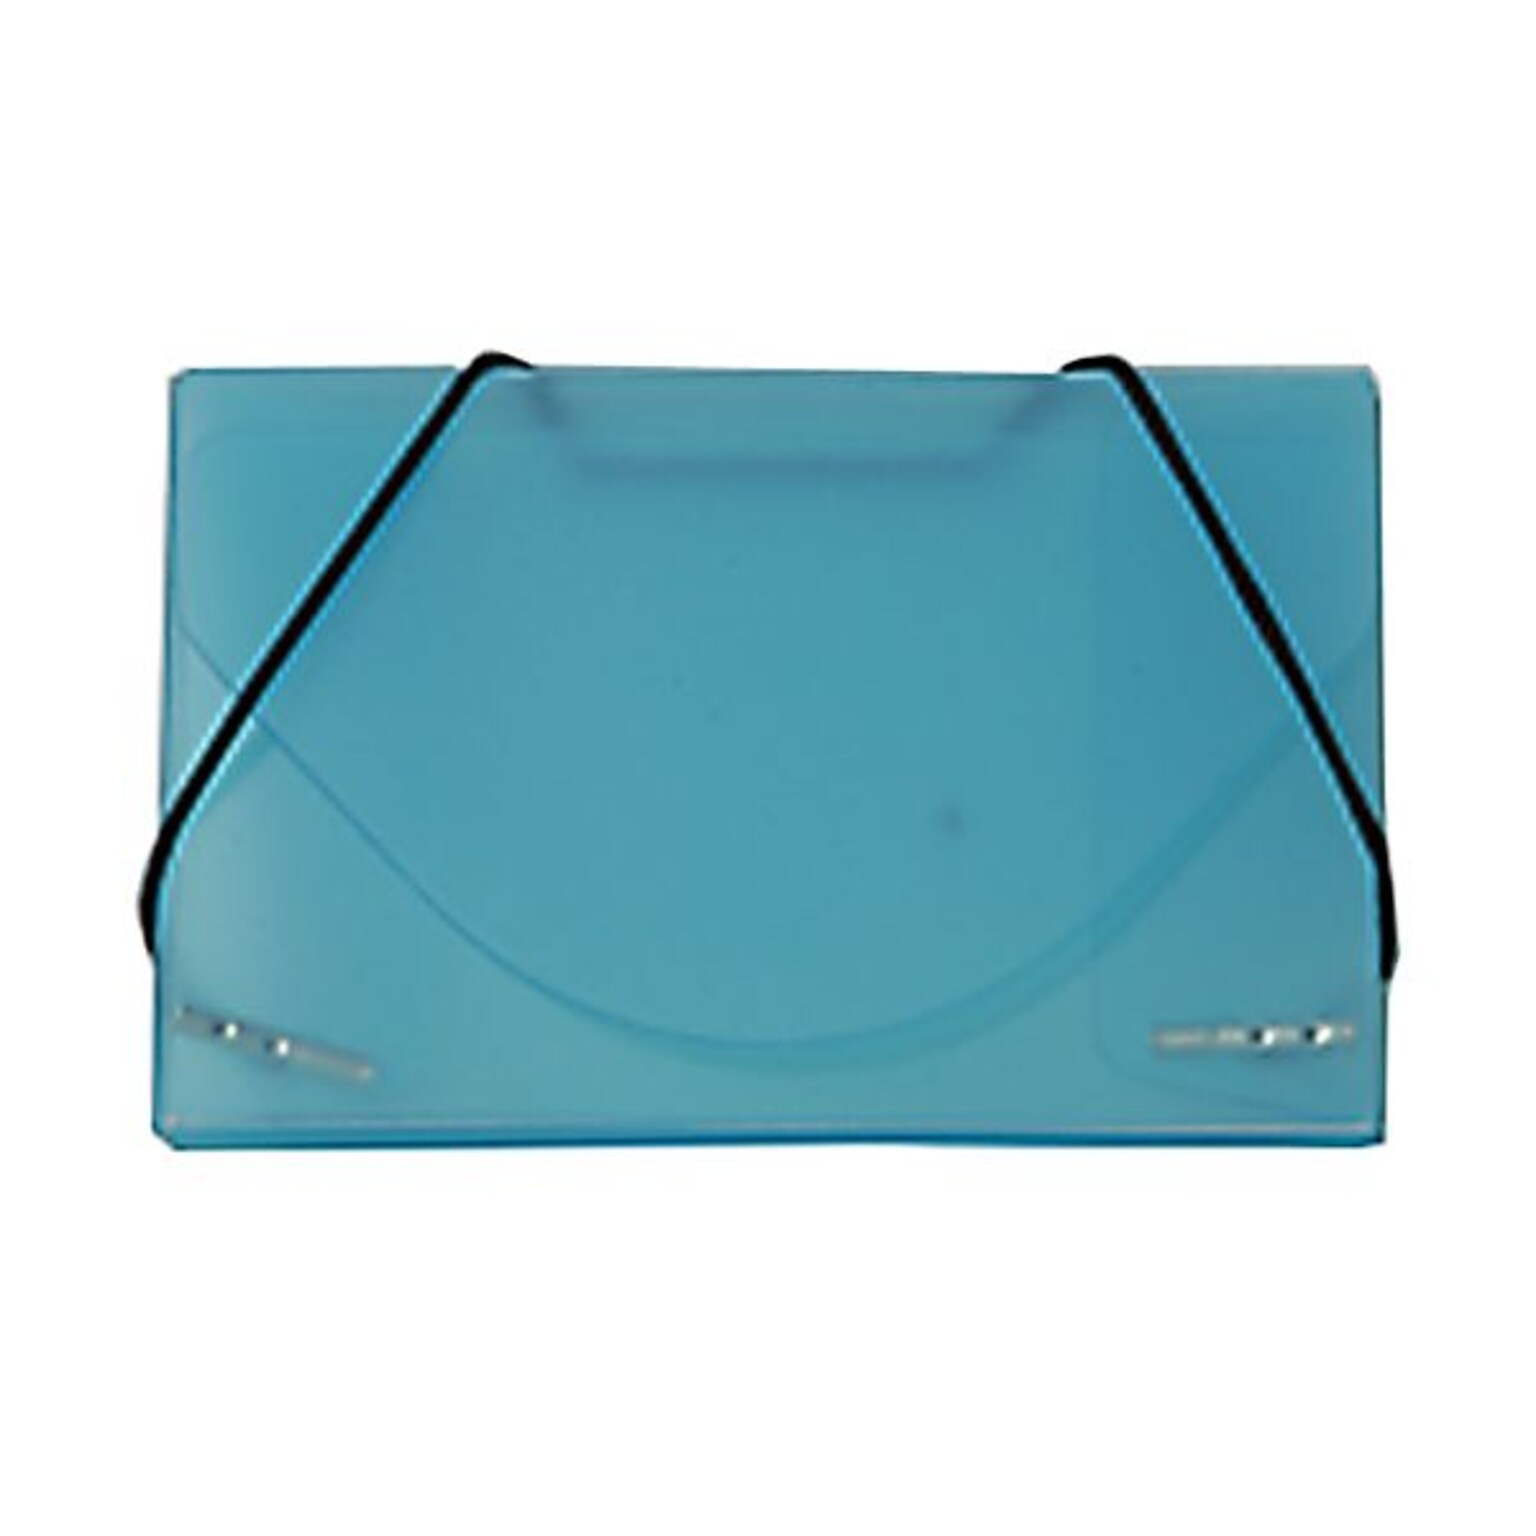 JAM Paper® Plastic Business Card Holder Case, Blue Frosted, Sold Individually (2500 013)